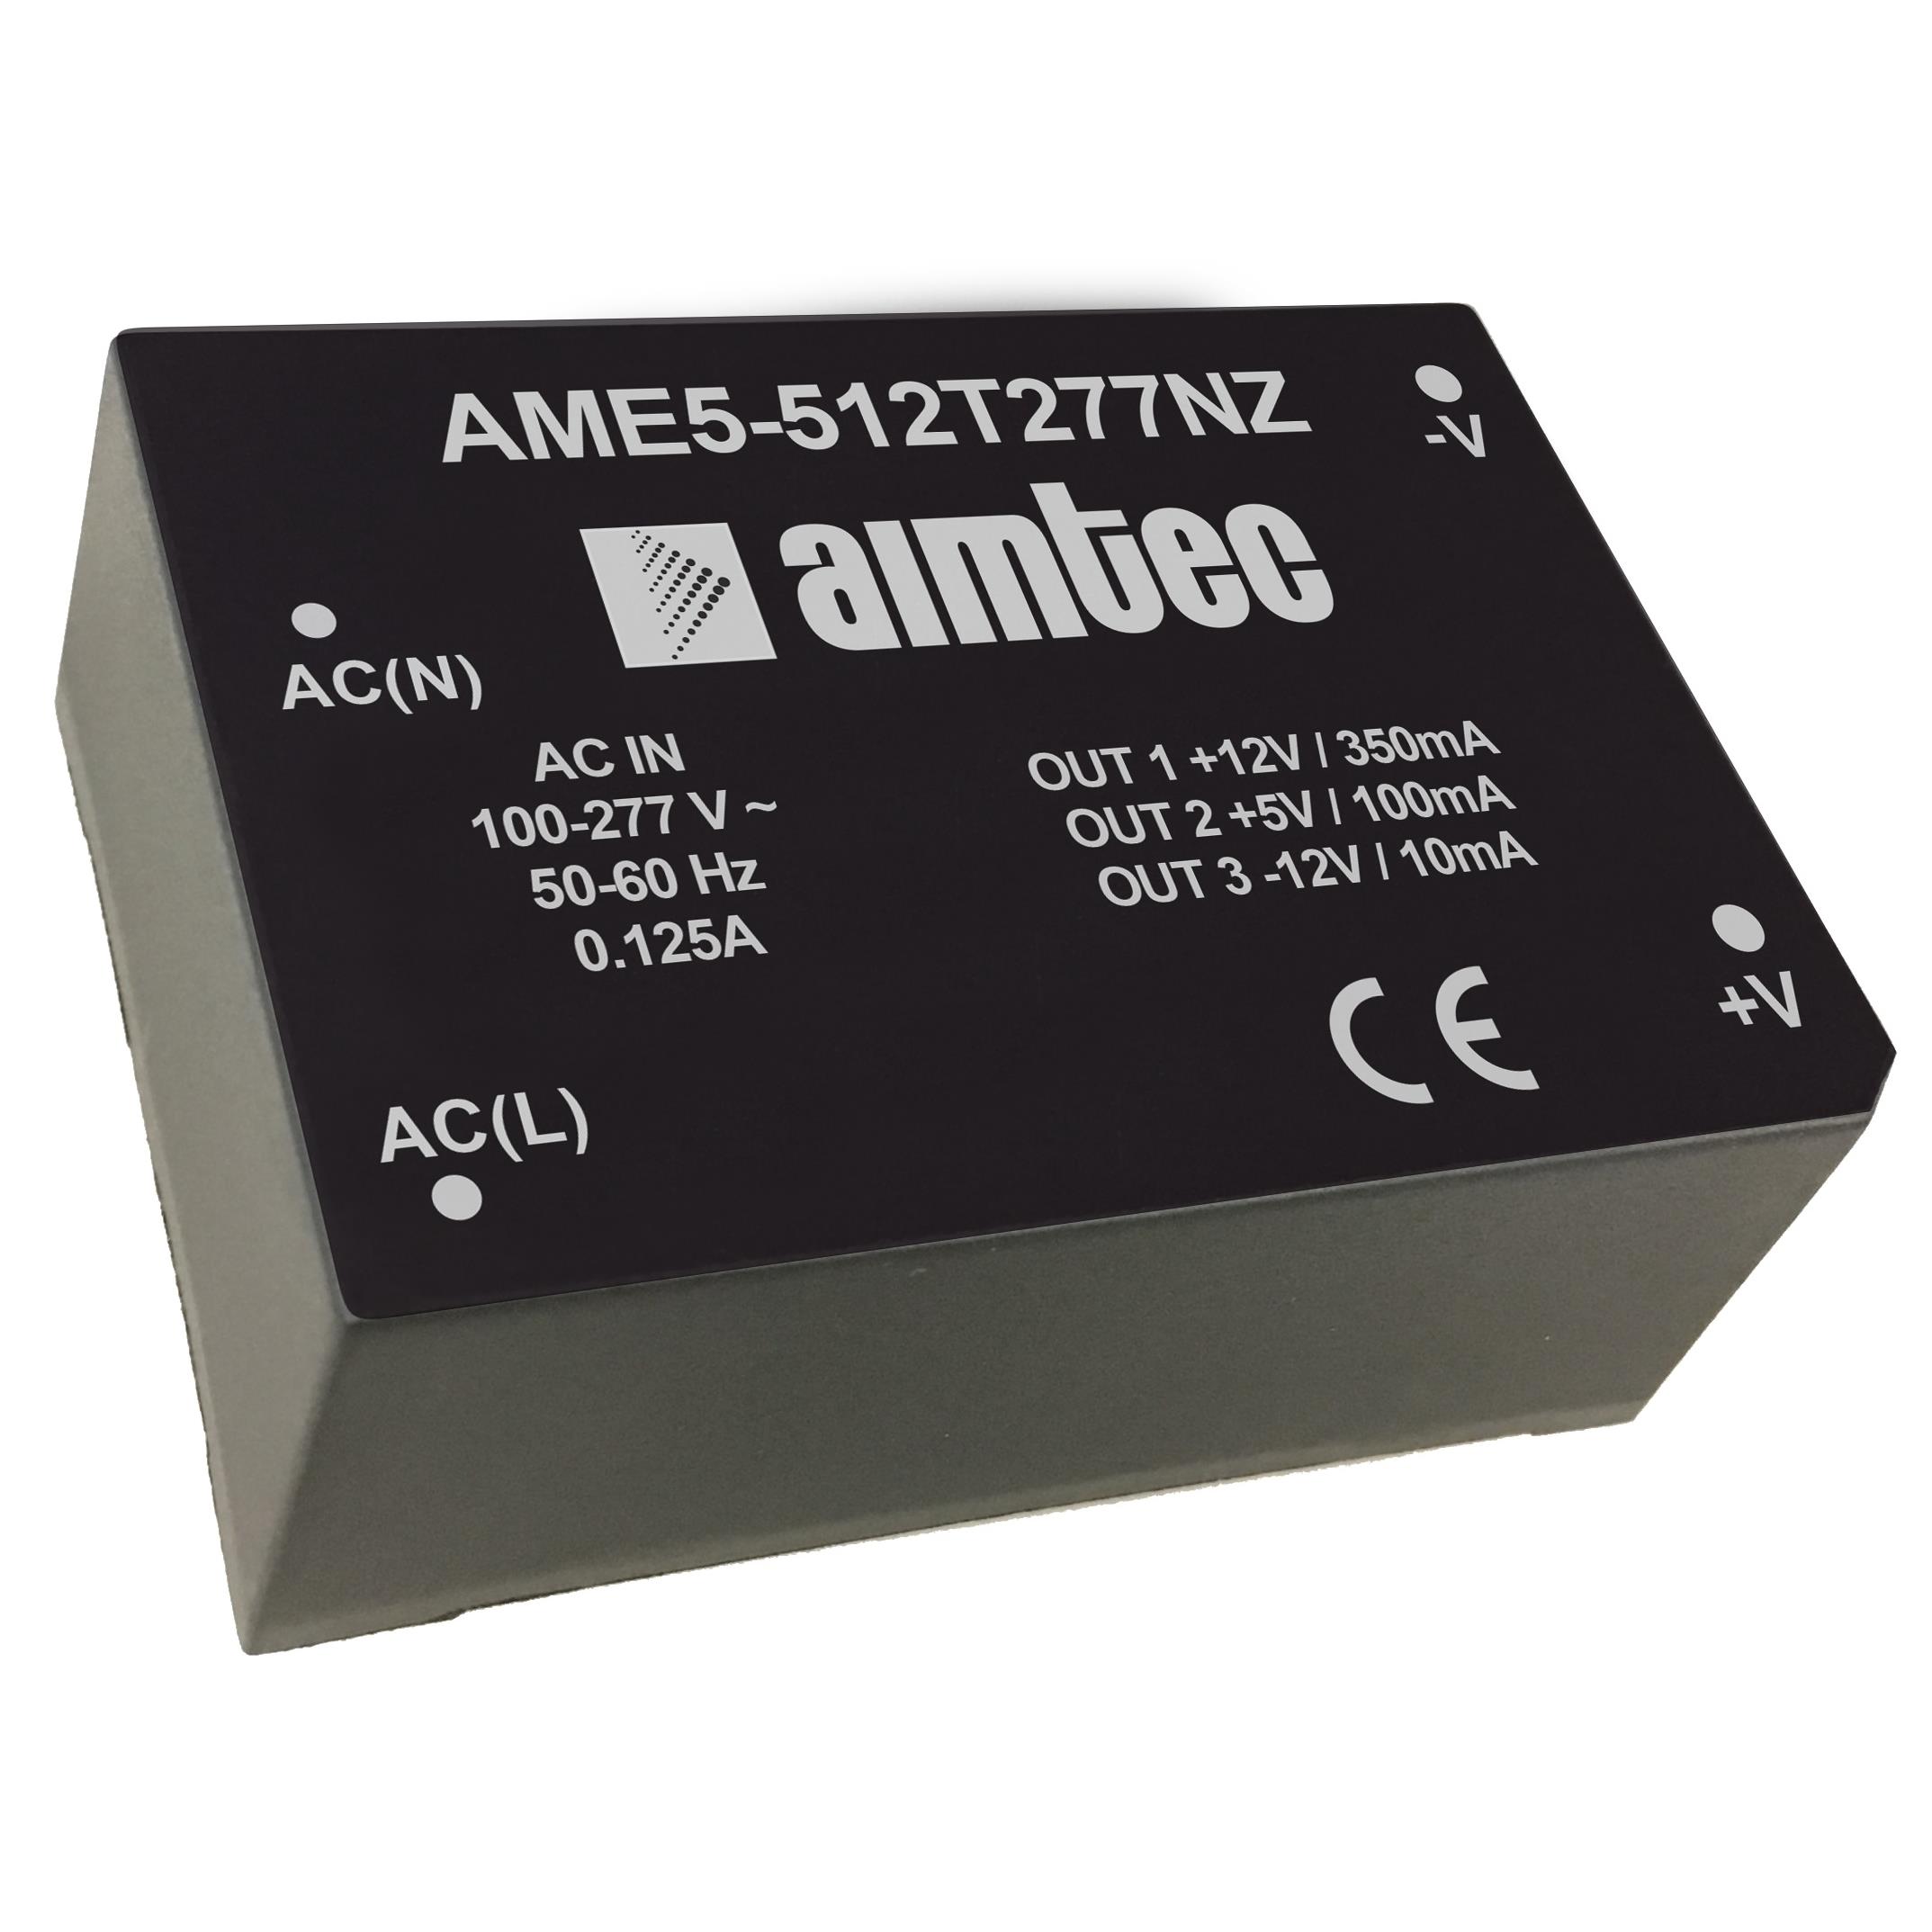 AME5-512T277NZ